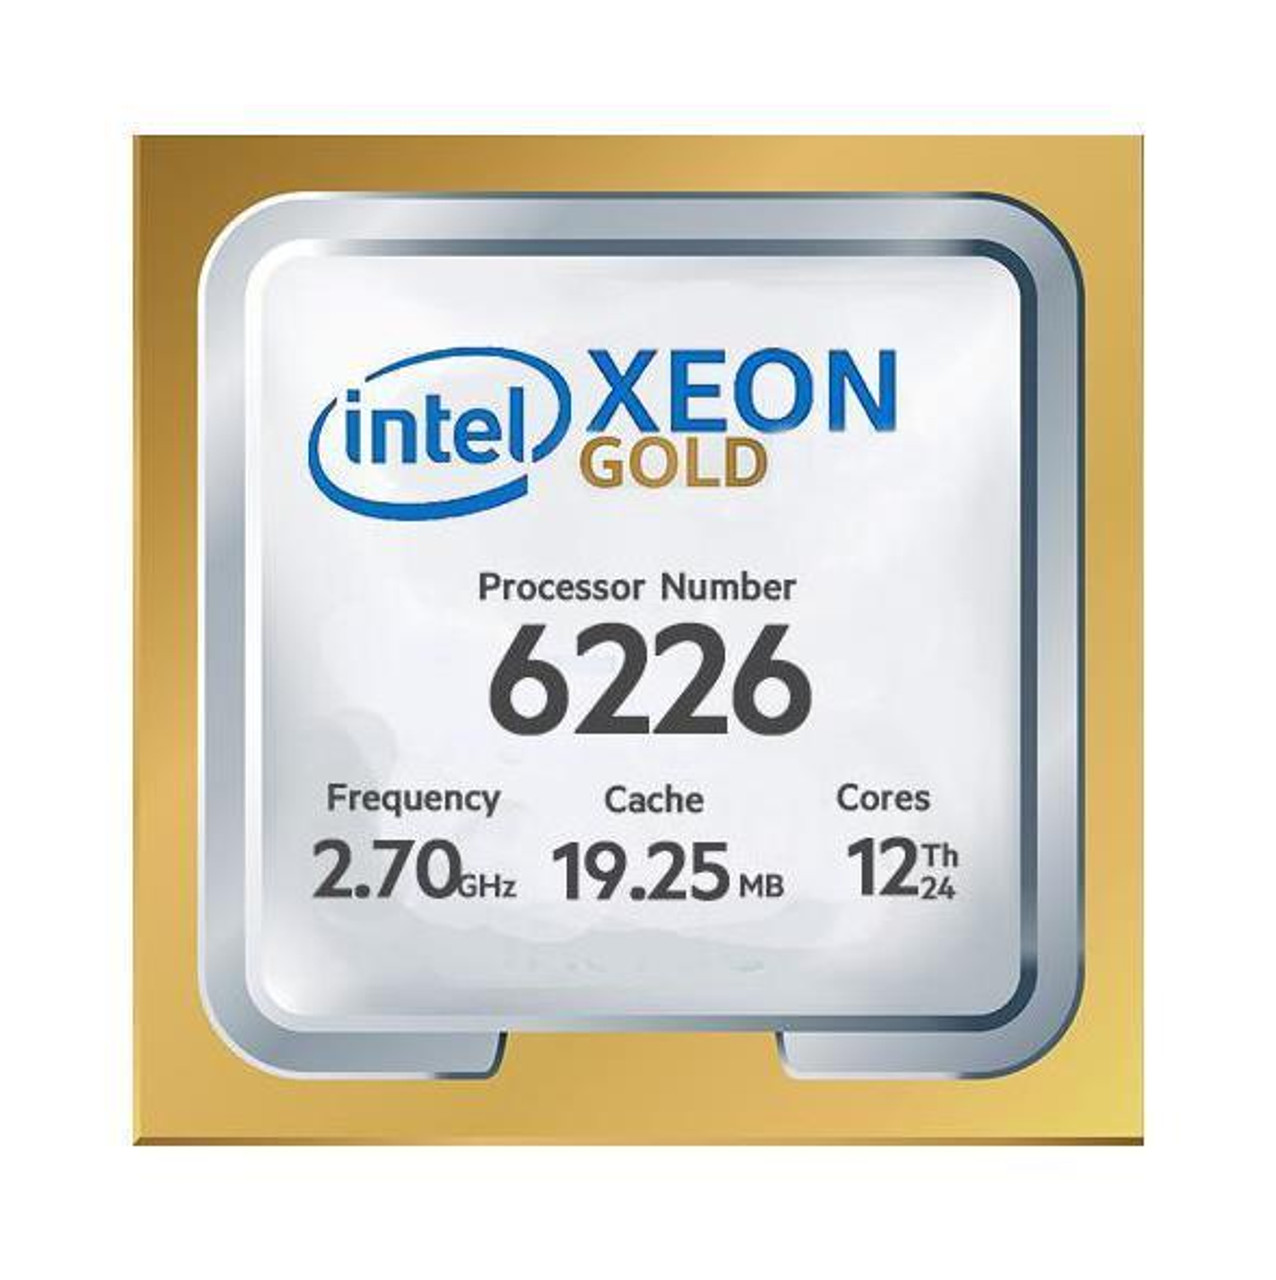 HPE 2.70GHz 19.25MB Cache Socket LGA3647 Intel Xeon Gold 6226 12-Core Processor Upgrade for DL560 Gen10